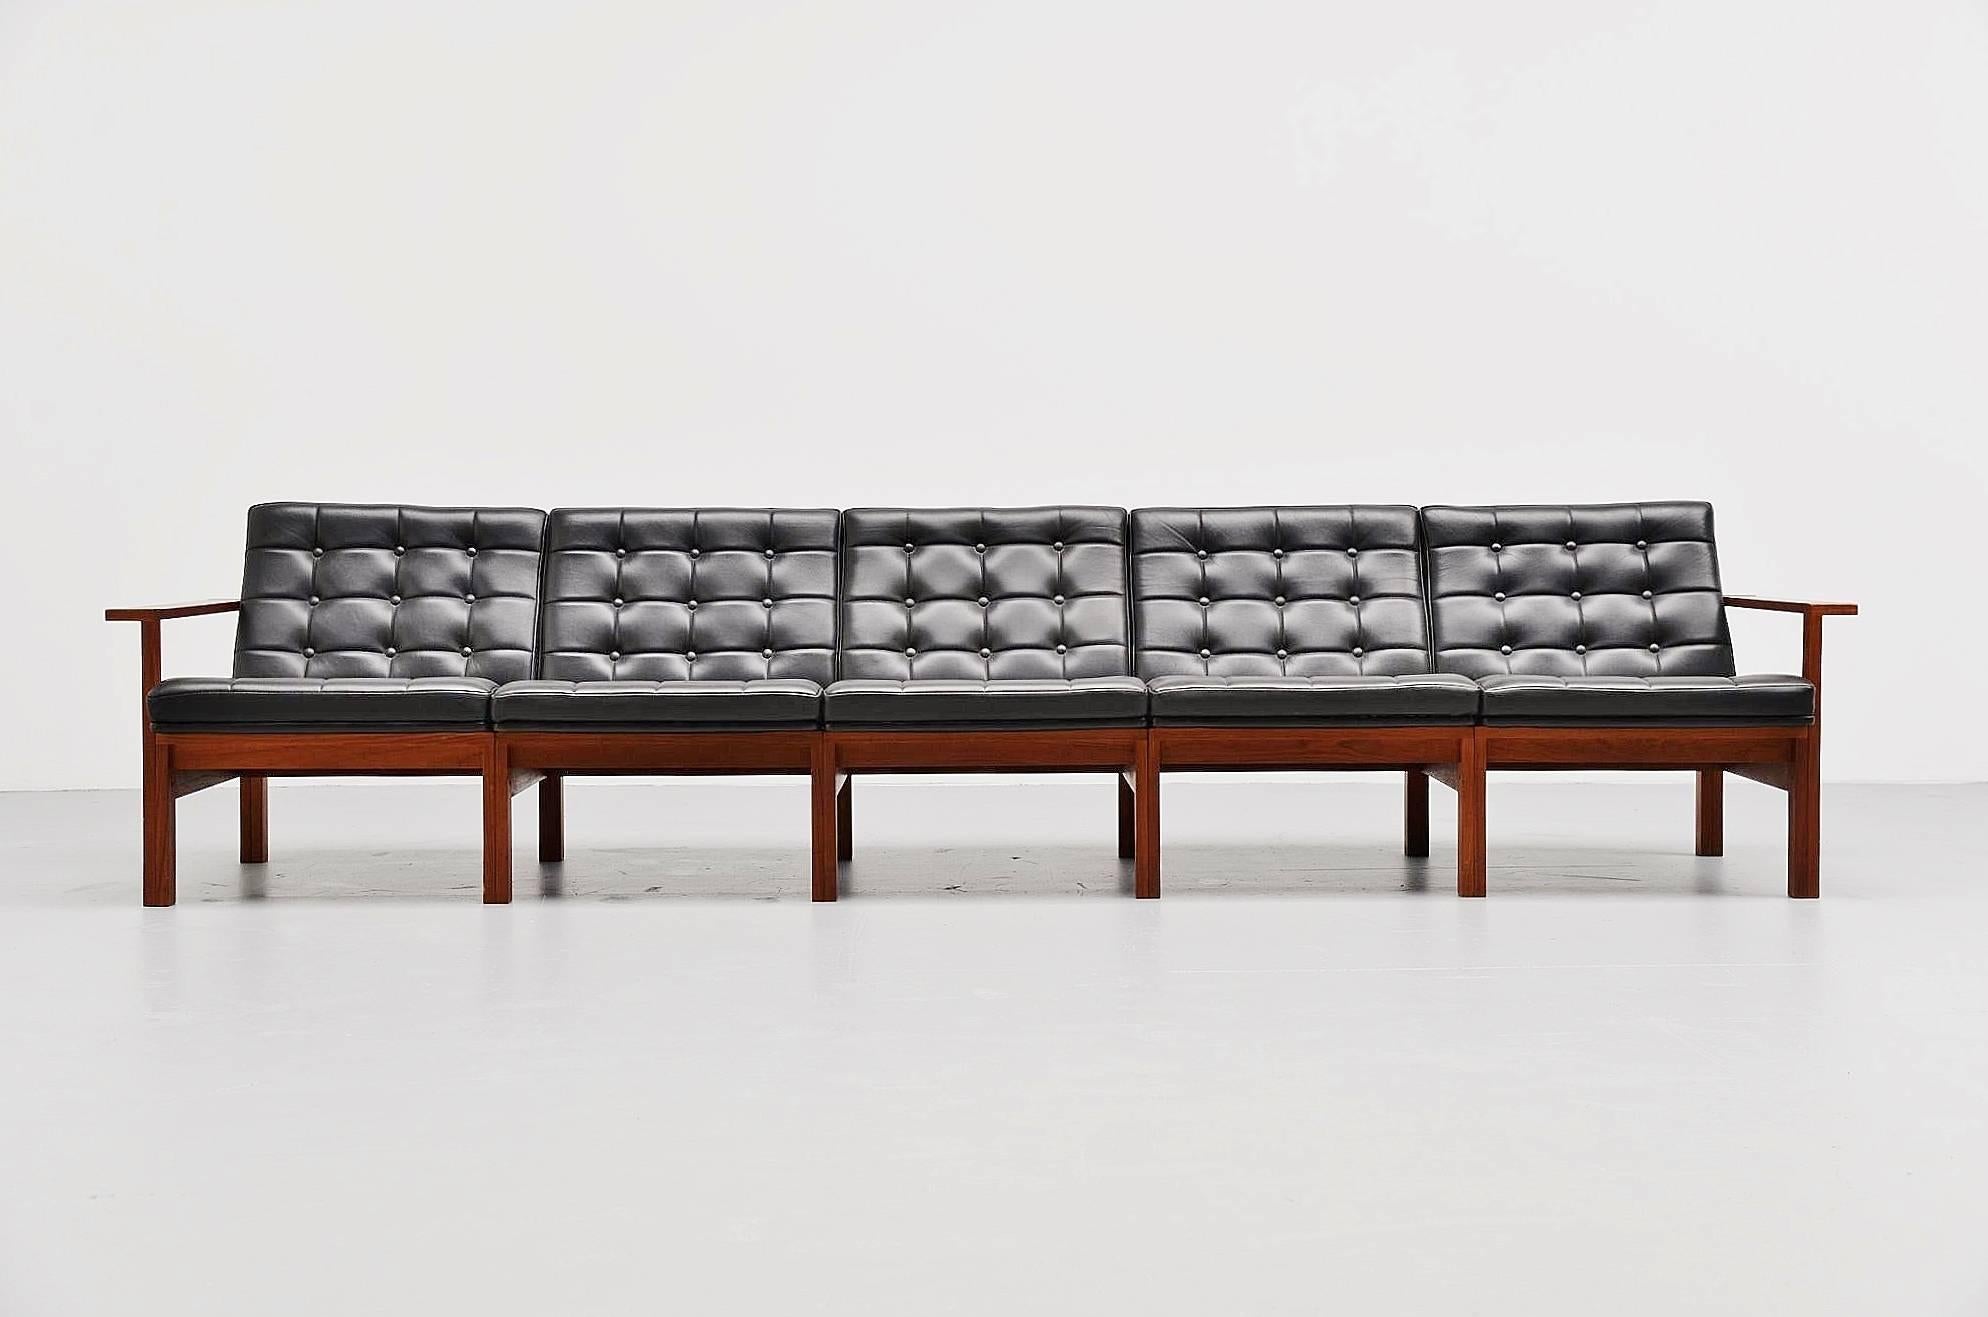 Nice modular 'moduline' sofa designed by Ole Gjerløv-Knudsen & Torben Lind, manufactured by France & Son, Denmark 1962. This sofa set is completely modular, can be used in different wanted positions. The frame is made of solid teak and the seats are